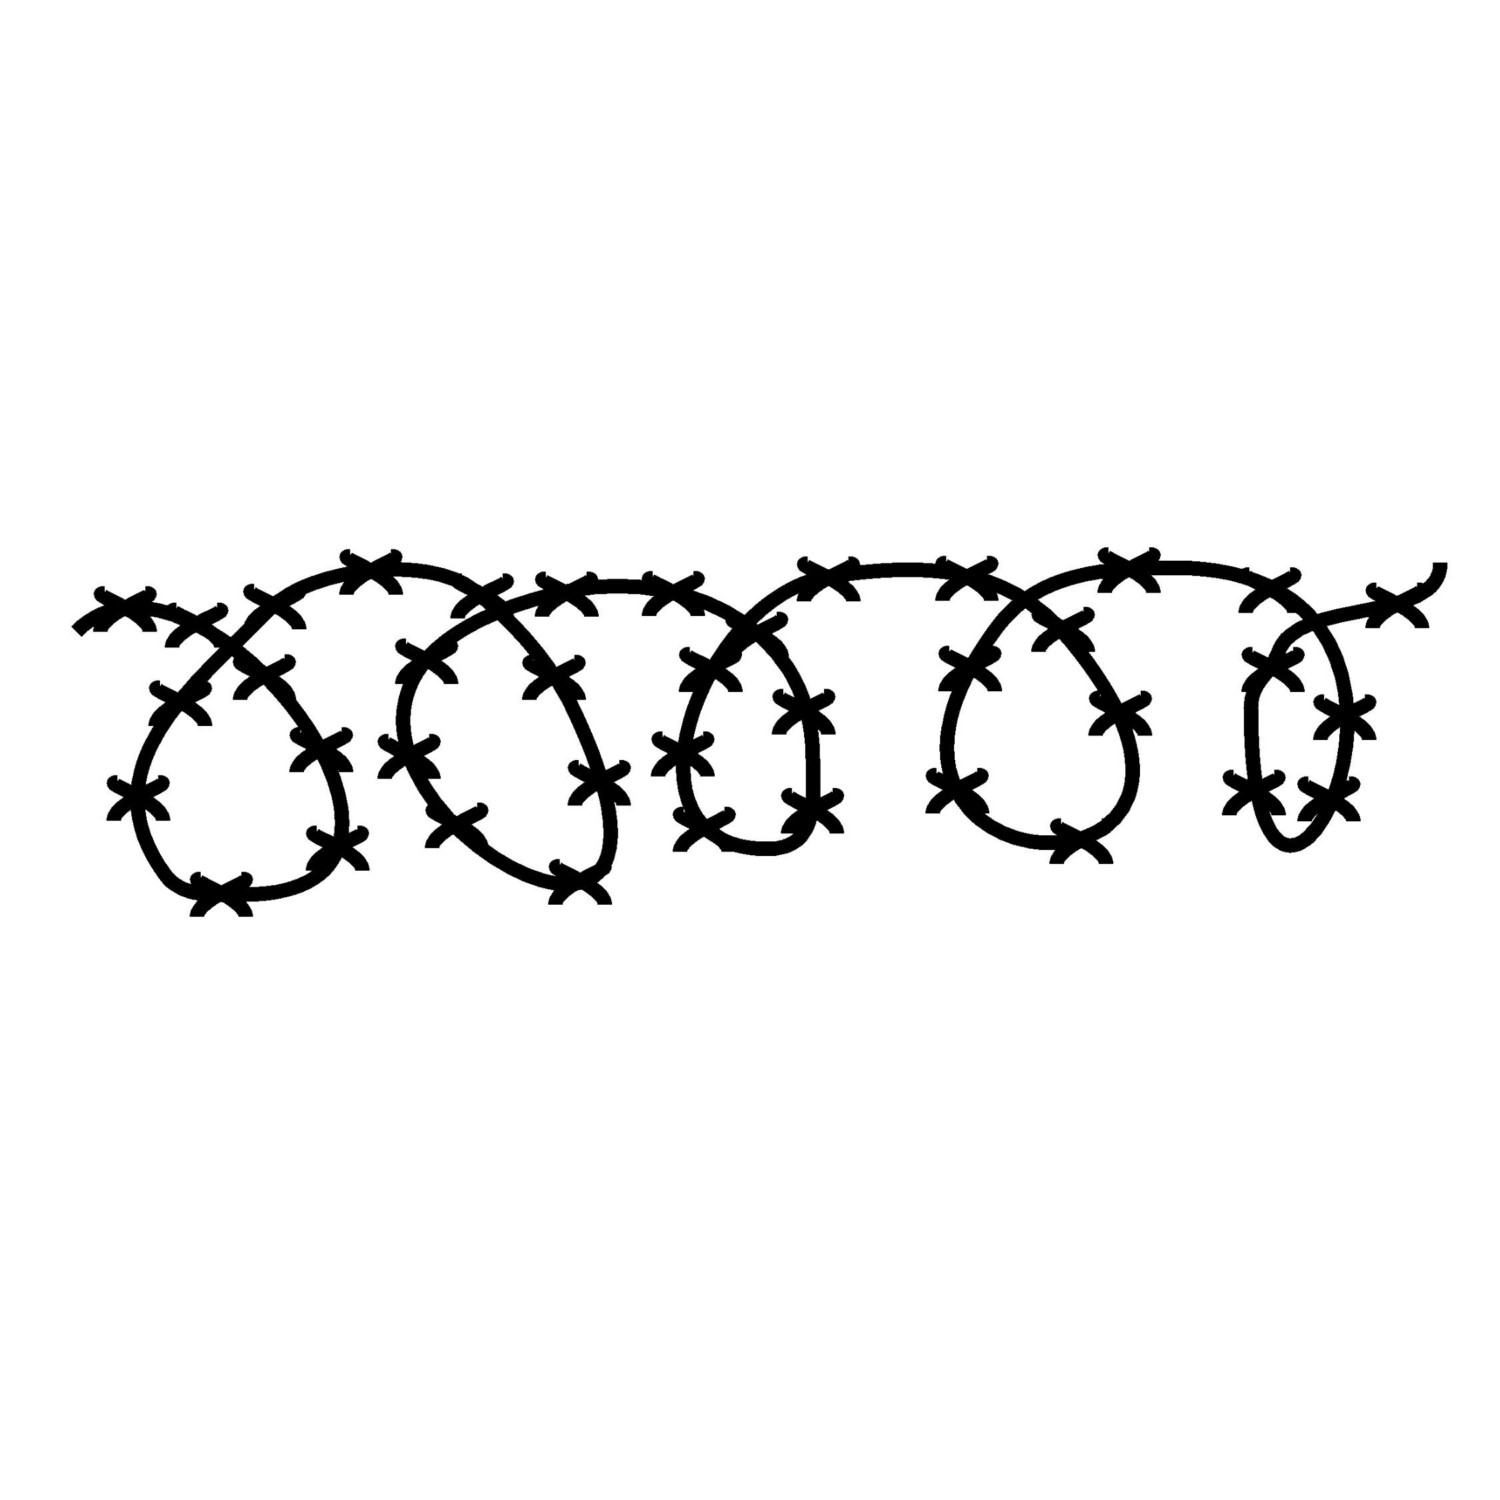 Barbed Wire Image   Clipart Best